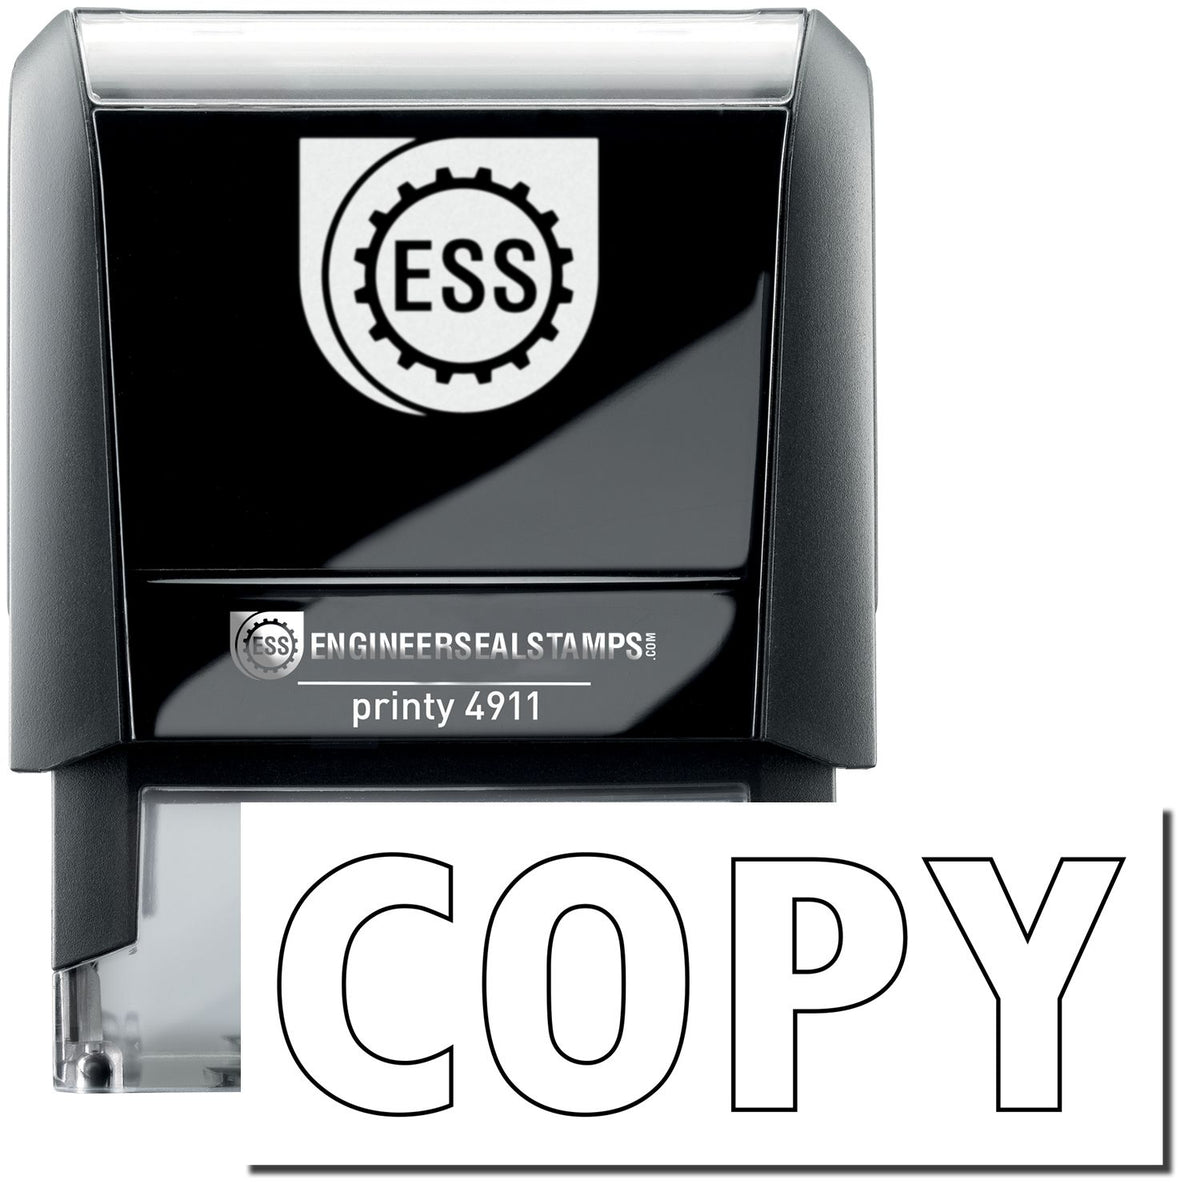 A self-inking stamp with a stamped image showing how the text &quot;COPY&quot; in an outline style is displayed after stamping.